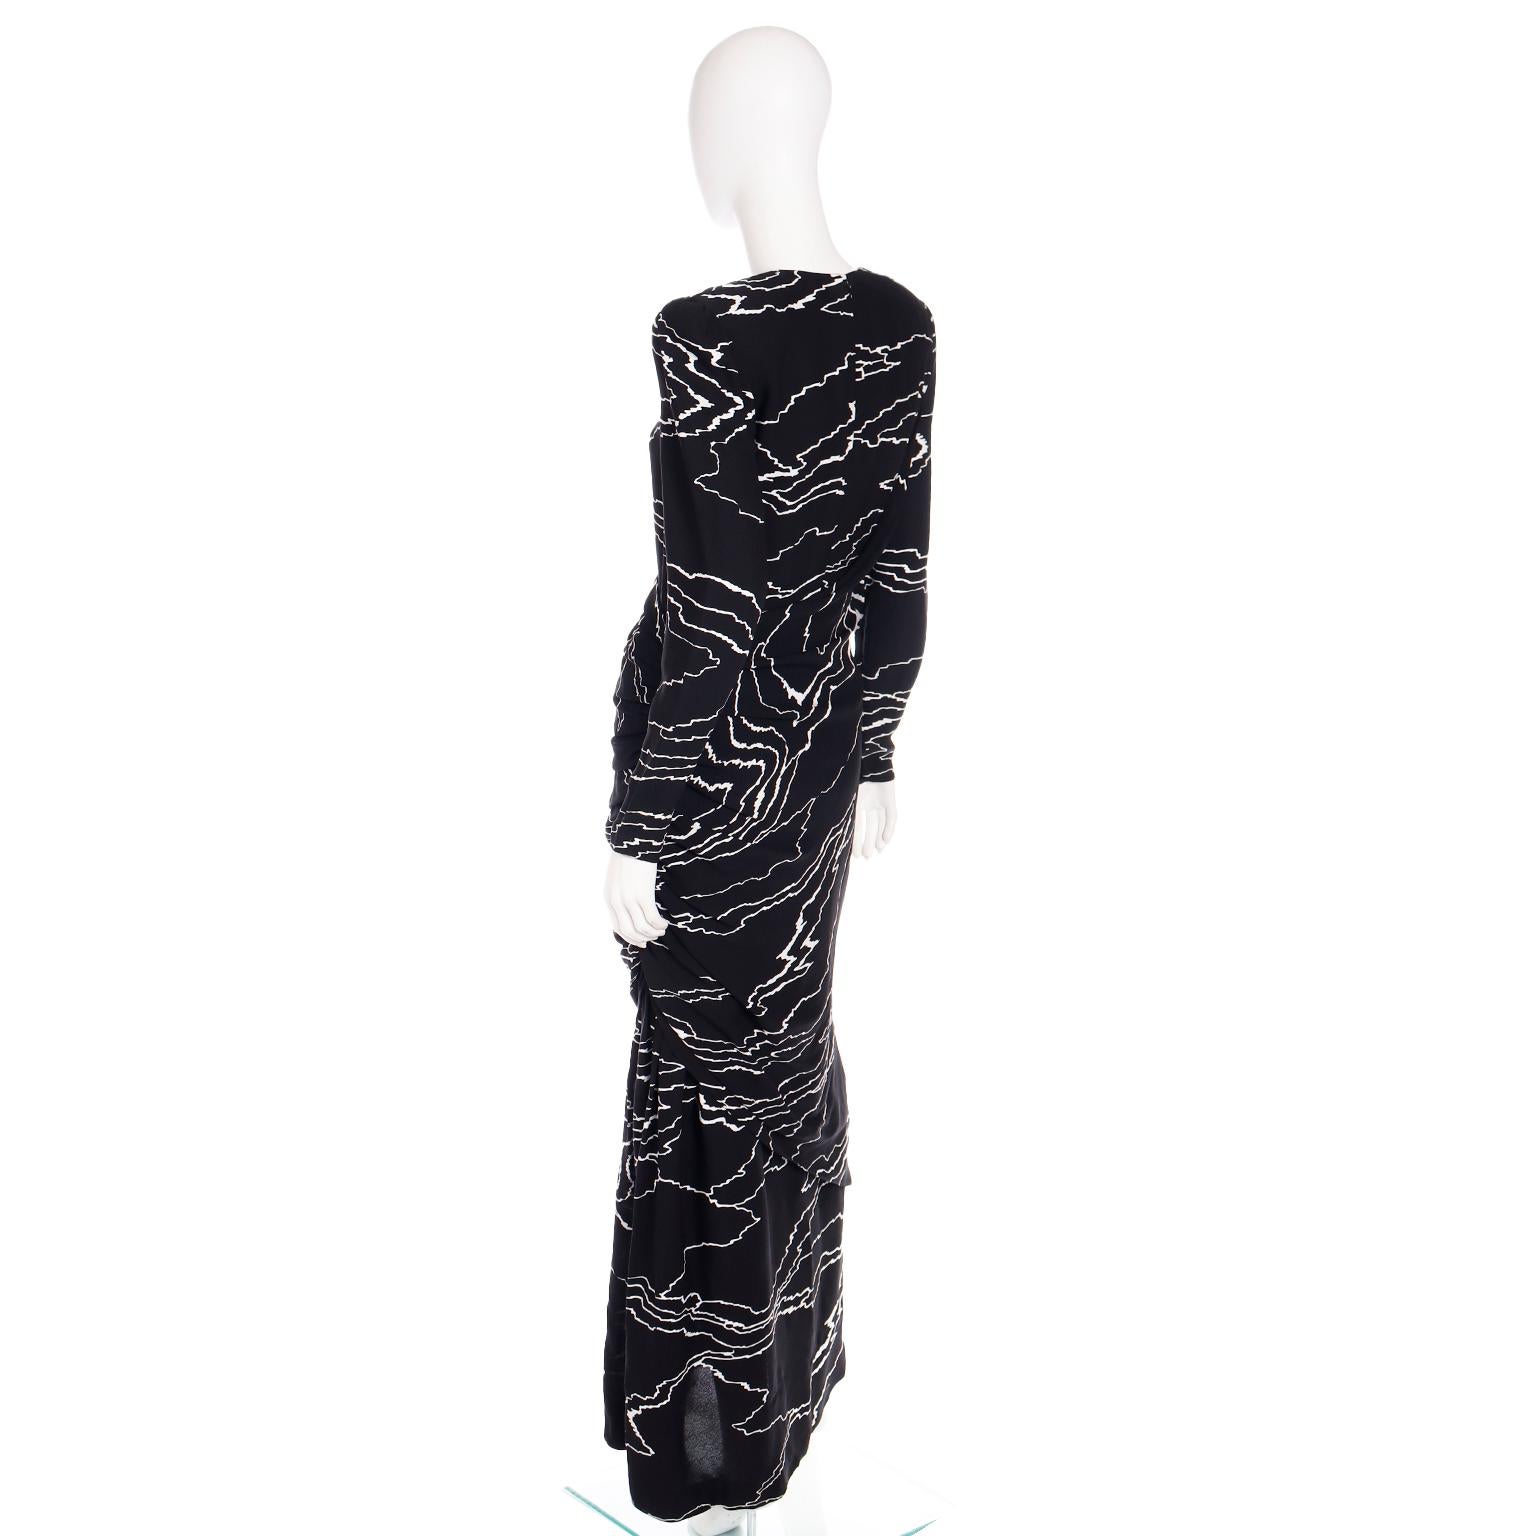 1985 Bill Blass Vintage Runway Dress Abstract Black White Evening Gown Draping For Sale 5